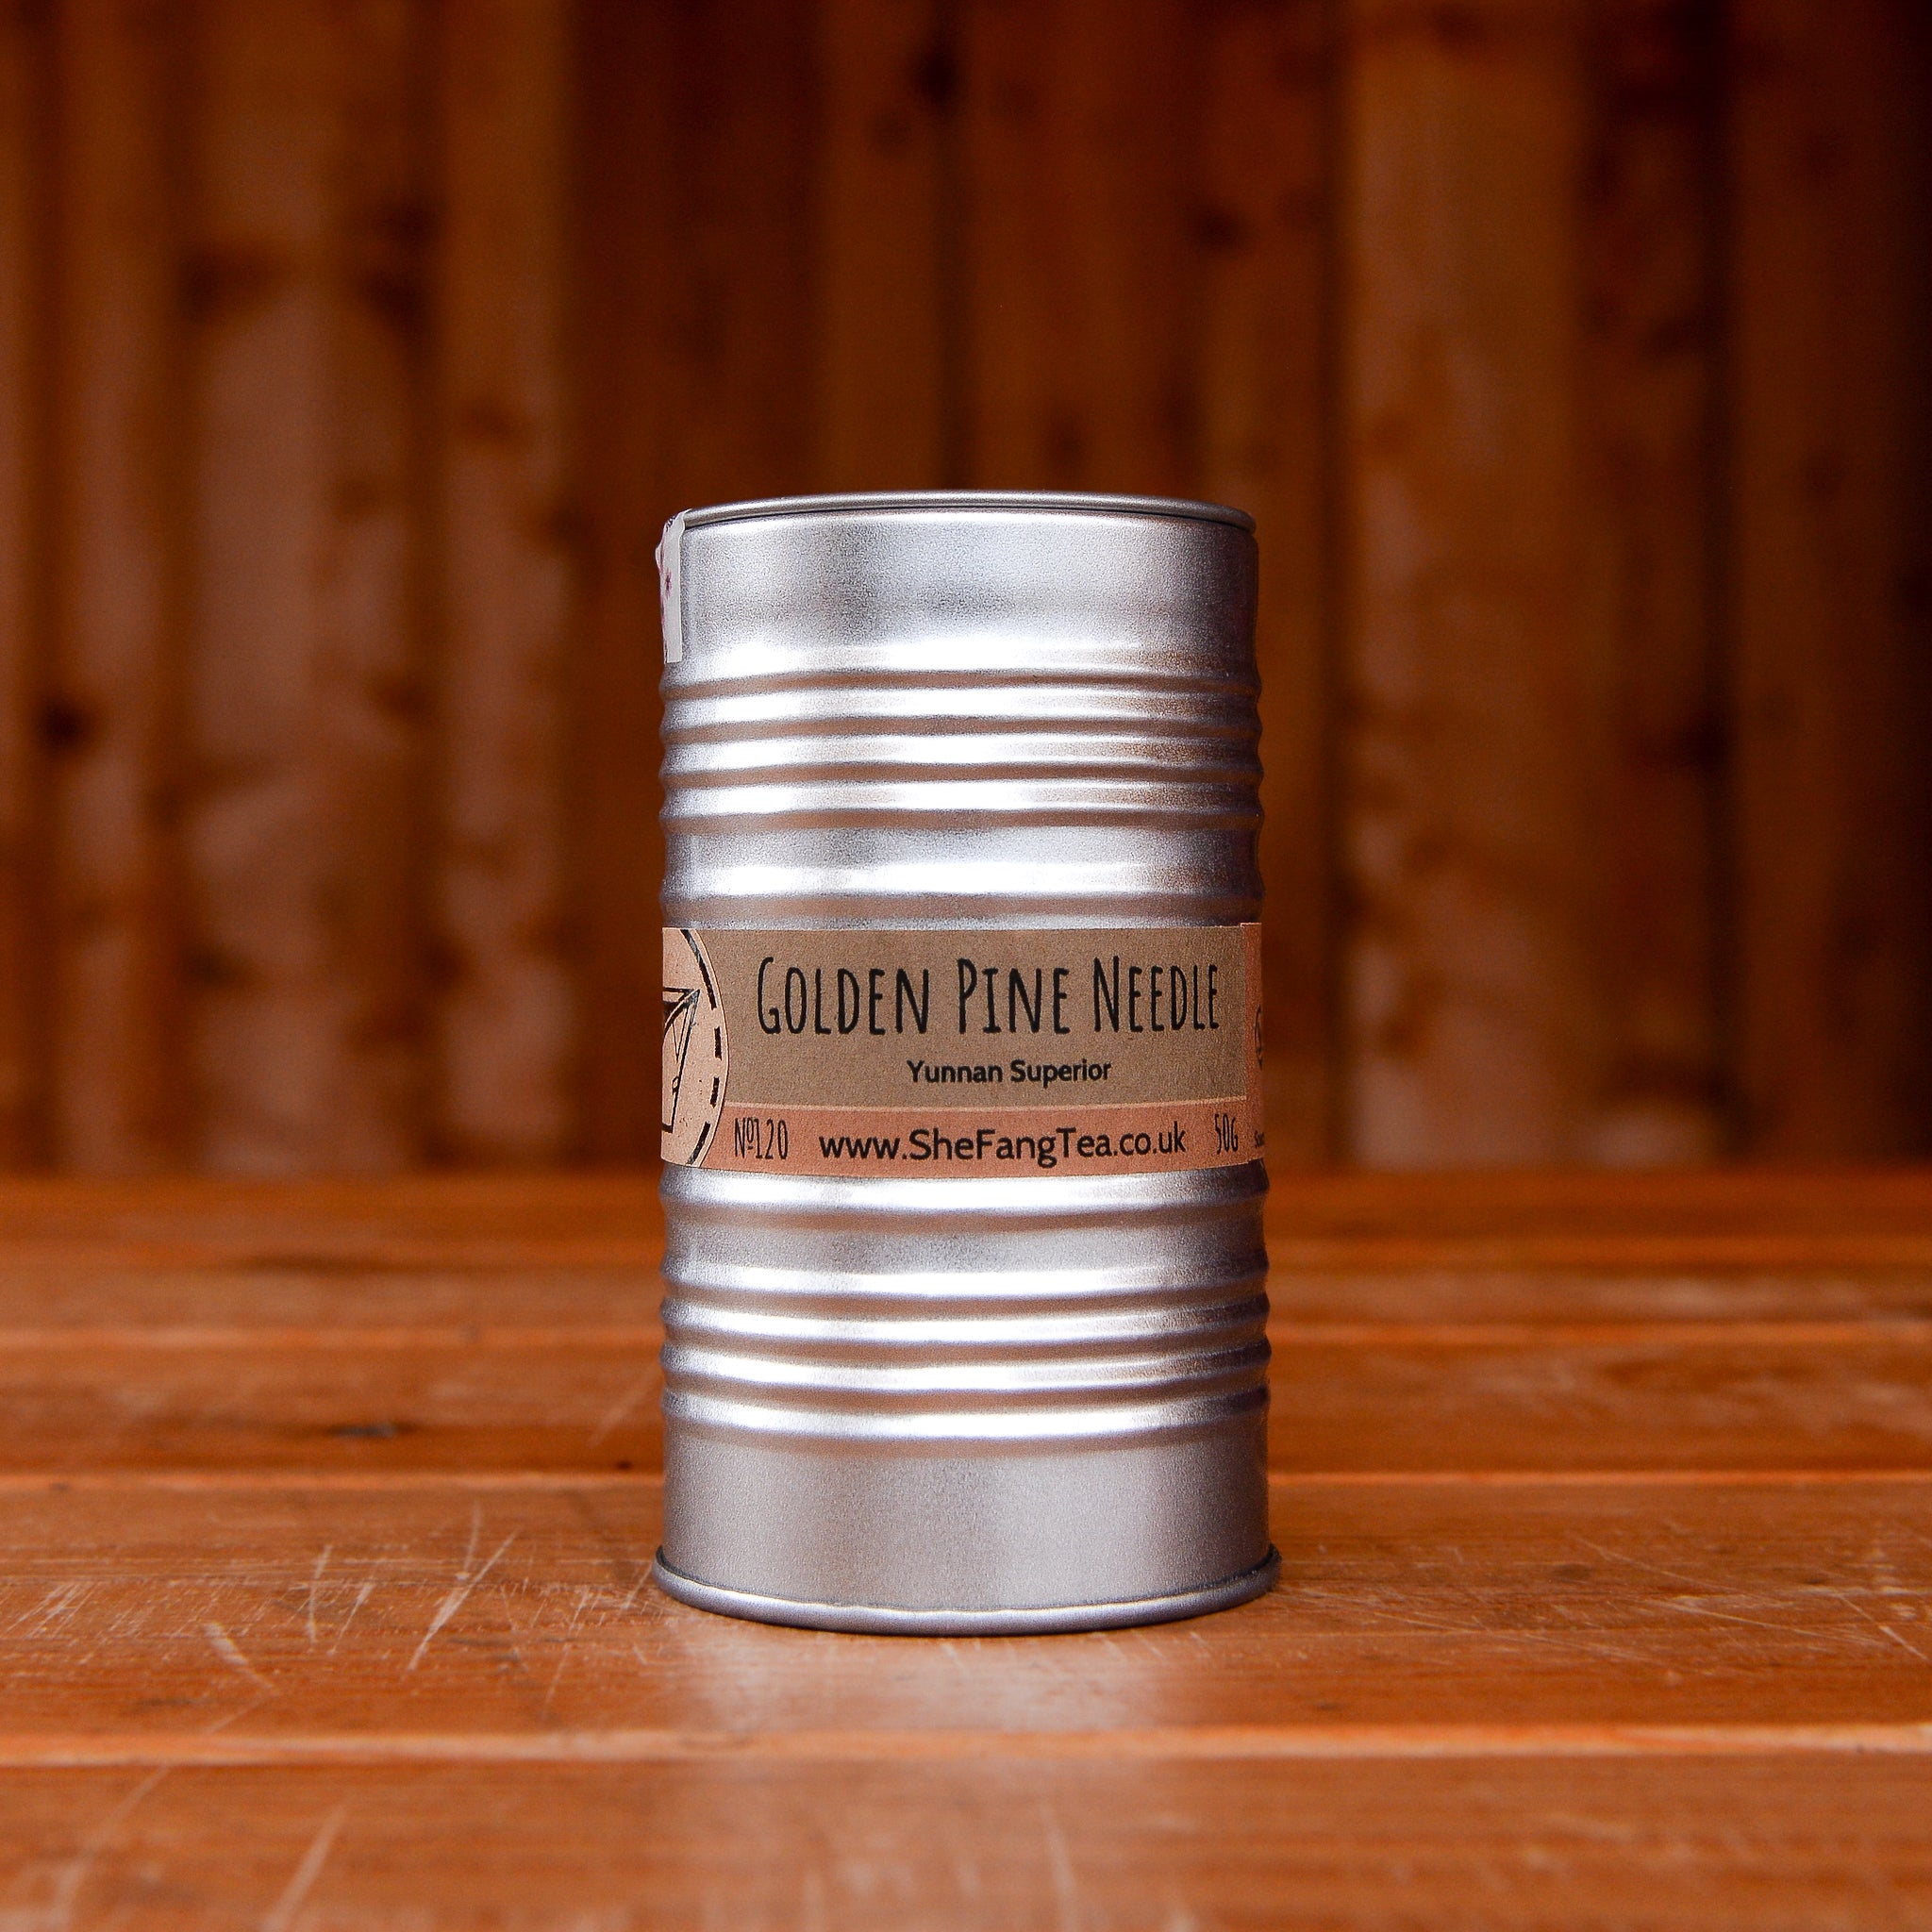 Golden Pine Needle tea in a tin can on a wooden table